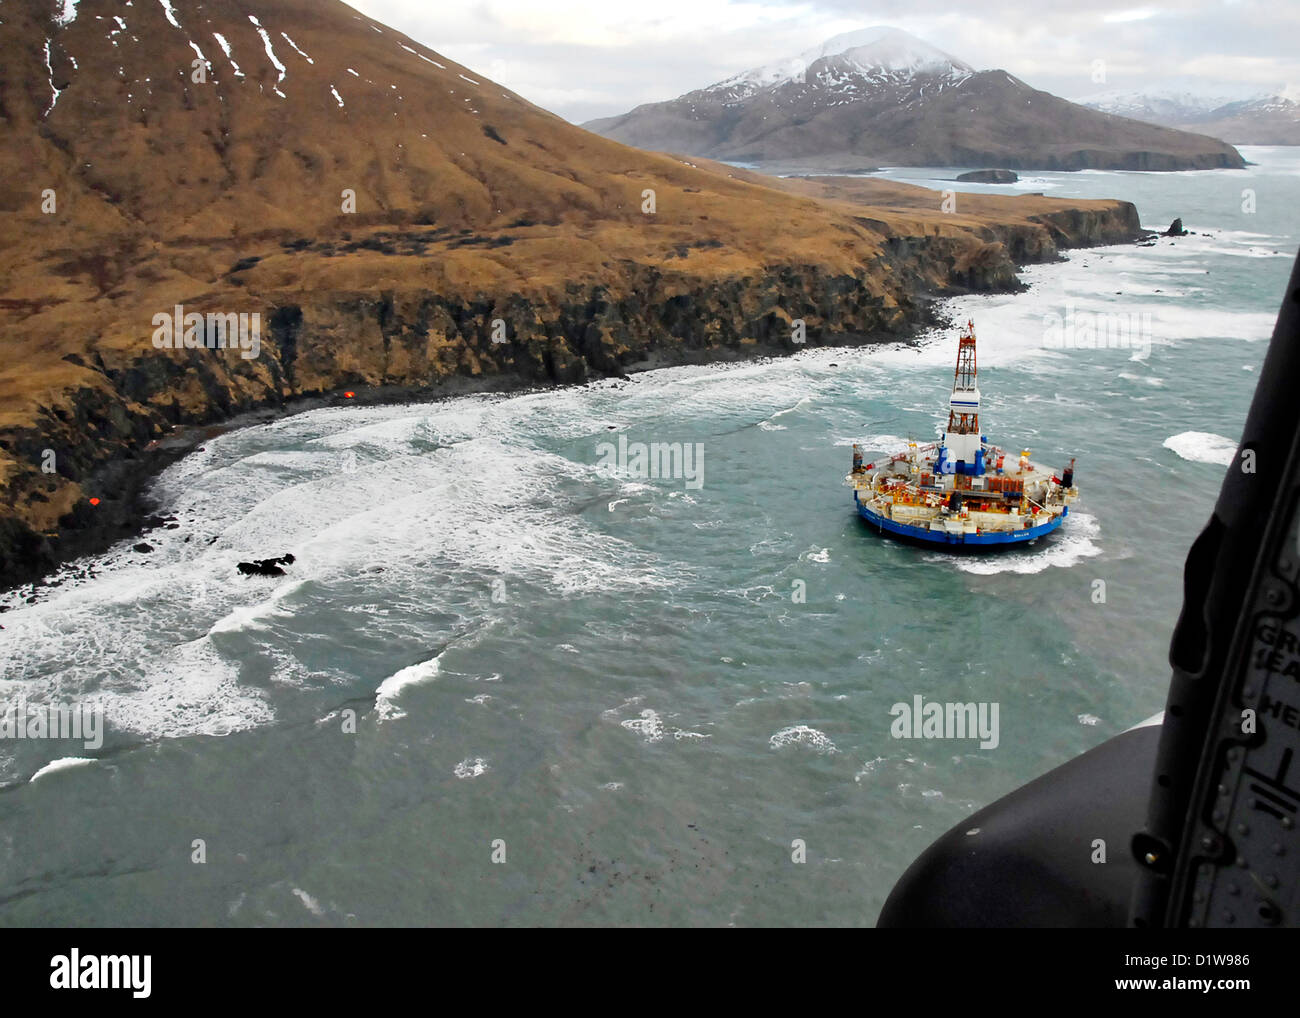 USCG oil drilling arctic platform Kodiak Kulluk MH-60 Jayhawk Alaska accident disaster tow towing energy Sitkalidak Island Royal Dutch Shell enviornmental enviornment ecology winter storm day outdoors US USA America Coast Guard rescue beached grounded waves swells aerial horizontal Stock Photo